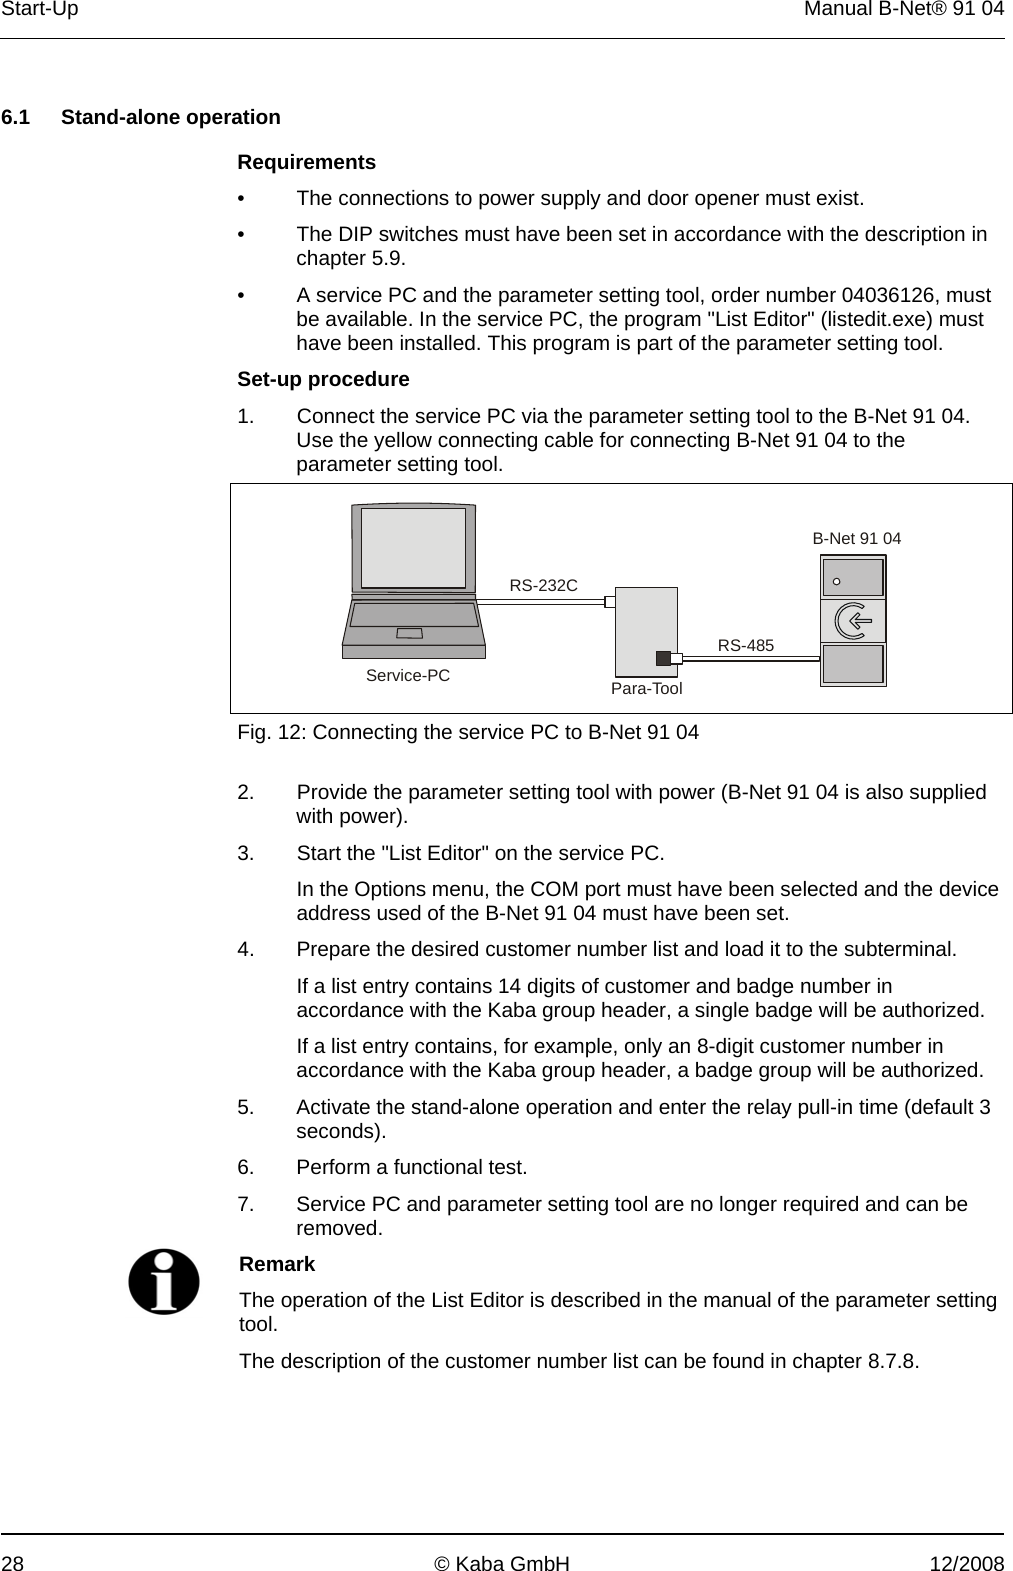 Start-Up  Manual B-Net® 91 04 28  © Kaba GmbH  12/2008   6.1 Stand-alone operation  Requirements •  The connections to power supply and door opener must exist. •  The DIP switches must have been set in accordance with the description in chapter 5.9. •  A service PC and the parameter setting tool, order number 04036126, must be available. In the service PC, the program &quot;List Editor&quot; (listedit.exe) must have been installed. This program is part of the parameter setting tool. Set-up procedure 1.  Connect the service PC via the parameter setting tool to the B-Net 91 04. Use the yellow connecting cable for connecting B-Net 91 04 to the parameter setting tool.  RS-232CRS-485B-Net 91 04Para-ToolService-PC Fig. 12: Connecting the service PC to B-Net 91 04  2.  Provide the parameter setting tool with power (B-Net 91 04 is also supplied with power). 3.  Start the &quot;List Editor&quot; on the service PC.   In the Options menu, the COM port must have been selected and the device address used of the B-Net 91 04 must have been set. 4. Prepare the desired customer number list and load it to the subterminal.   If a list entry contains 14 digits of customer and badge number in accordance with the Kaba group header, a single badge will be authorized.   If a list entry contains, for example, only an 8-digit customer number in accordance with the Kaba group header, a badge group will be authorized. 5. Activate the stand-alone operation and enter the relay pull-in time (default 3 seconds). 6. Perform a functional test. 7. Service PC and parameter setting tool are no longer required and can be removed.  Remark The operation of the List Editor is described in the manual of the parameter setting tool. The description of the customer number list can be found in chapter 8.7.8.  